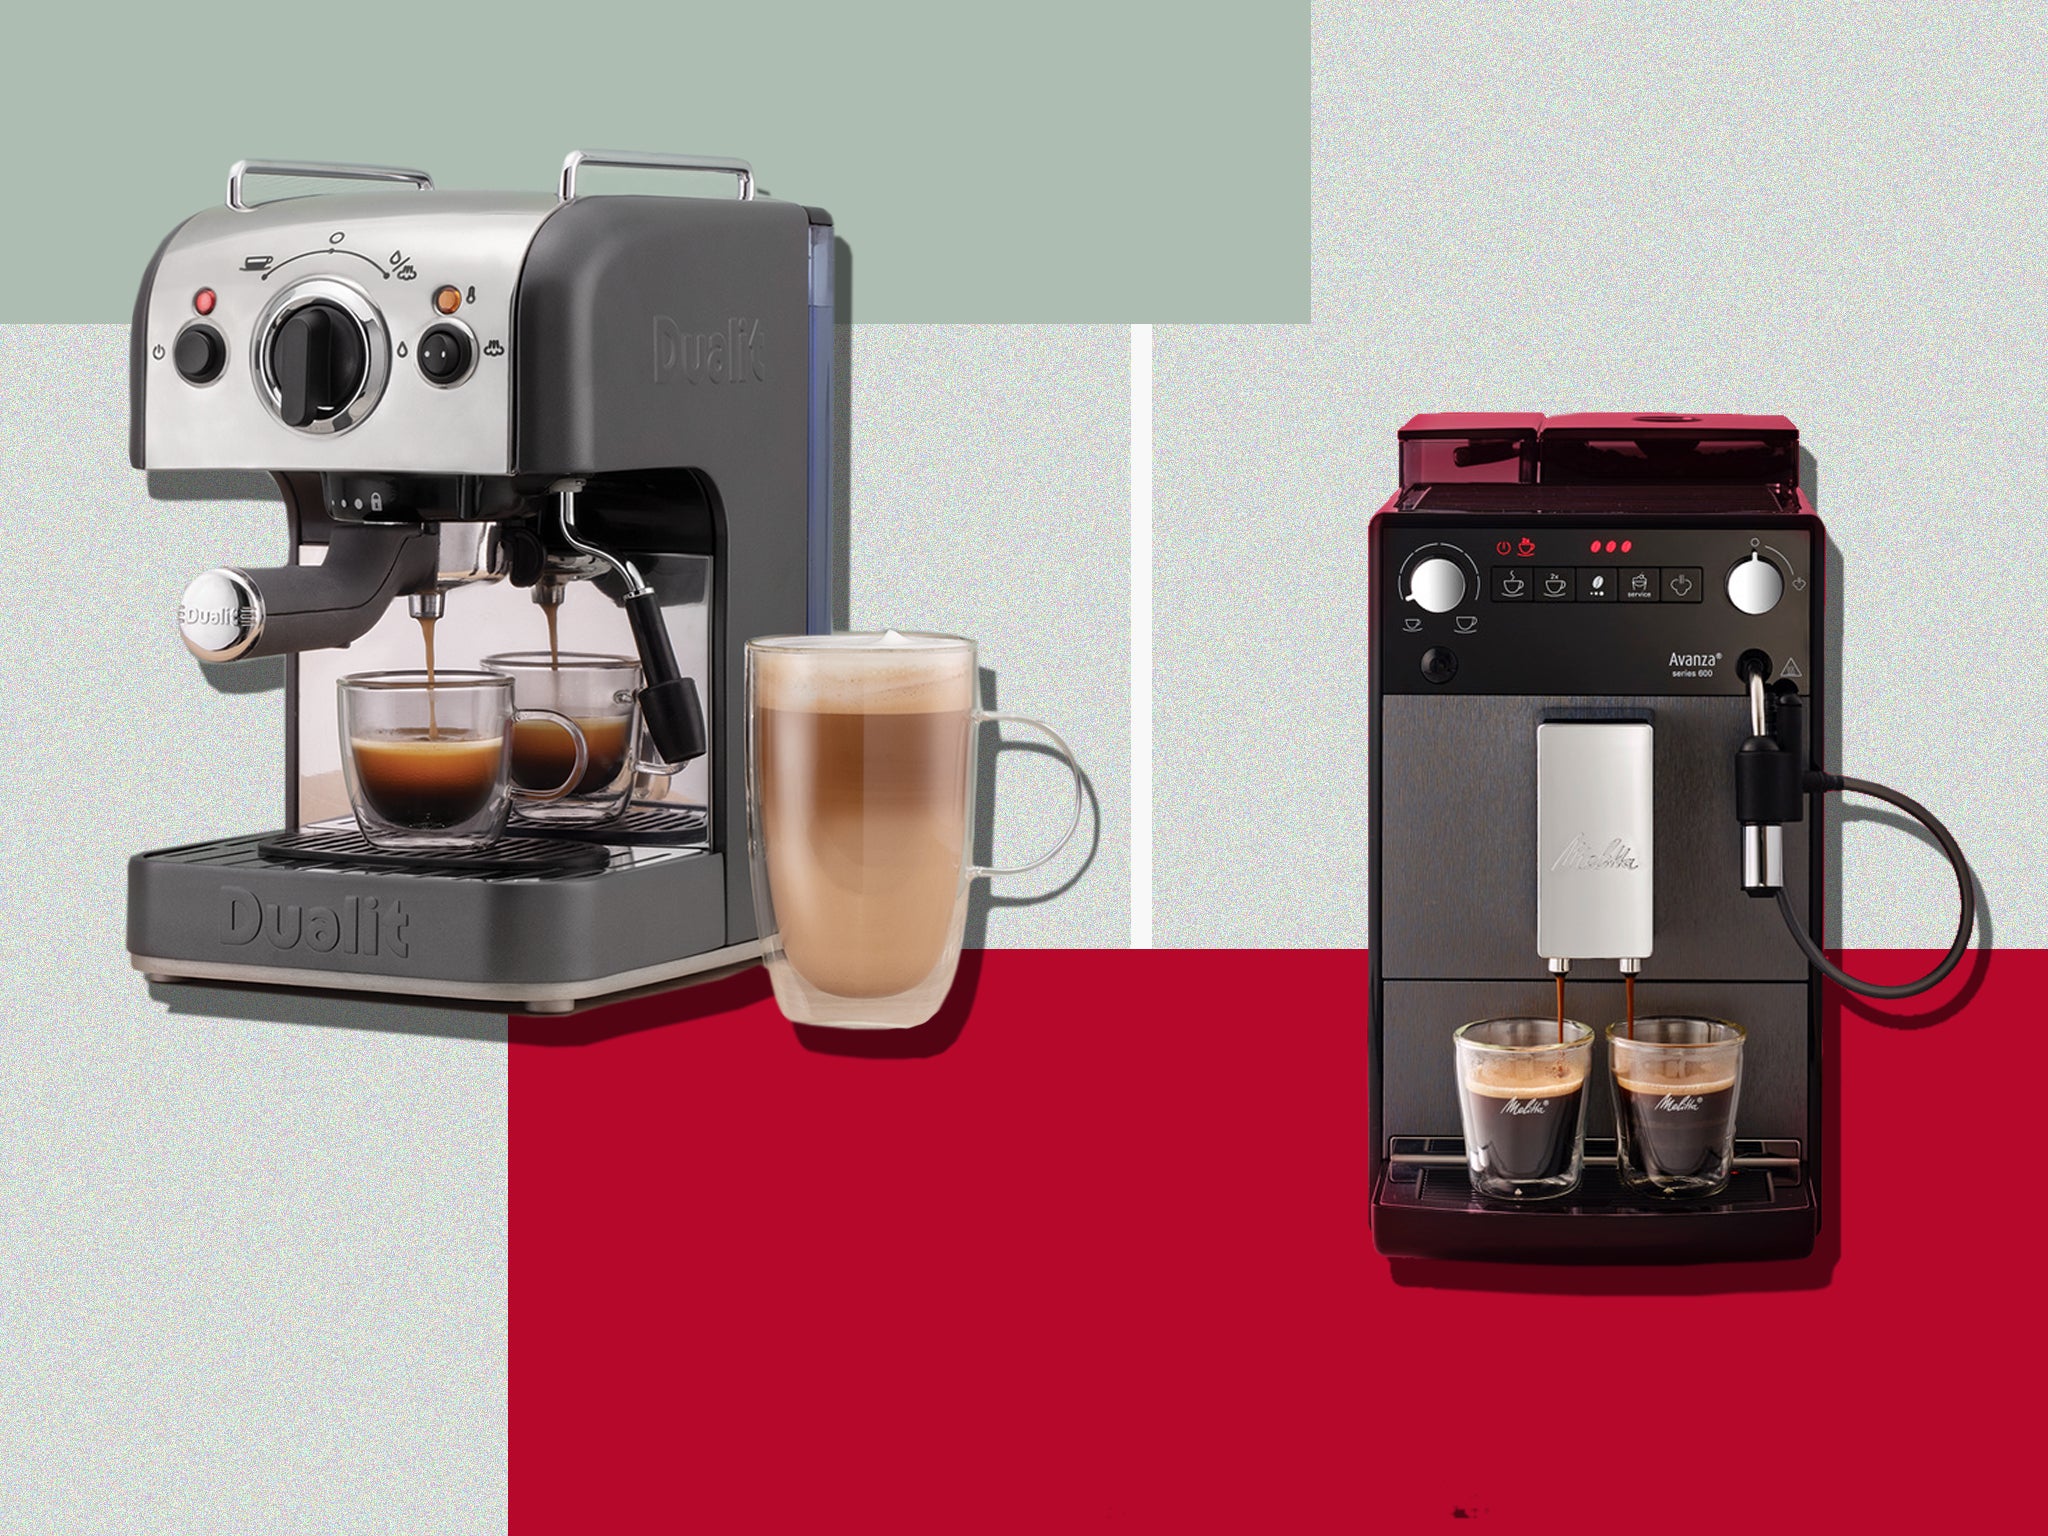 Ideal for Cappuccinos & Lattes Red 15 Bar Pressure Pump Barista Style Coffee Maker with Built in Grinder & Milk Frother Ariete 1318R Moderna Espresso Machine 